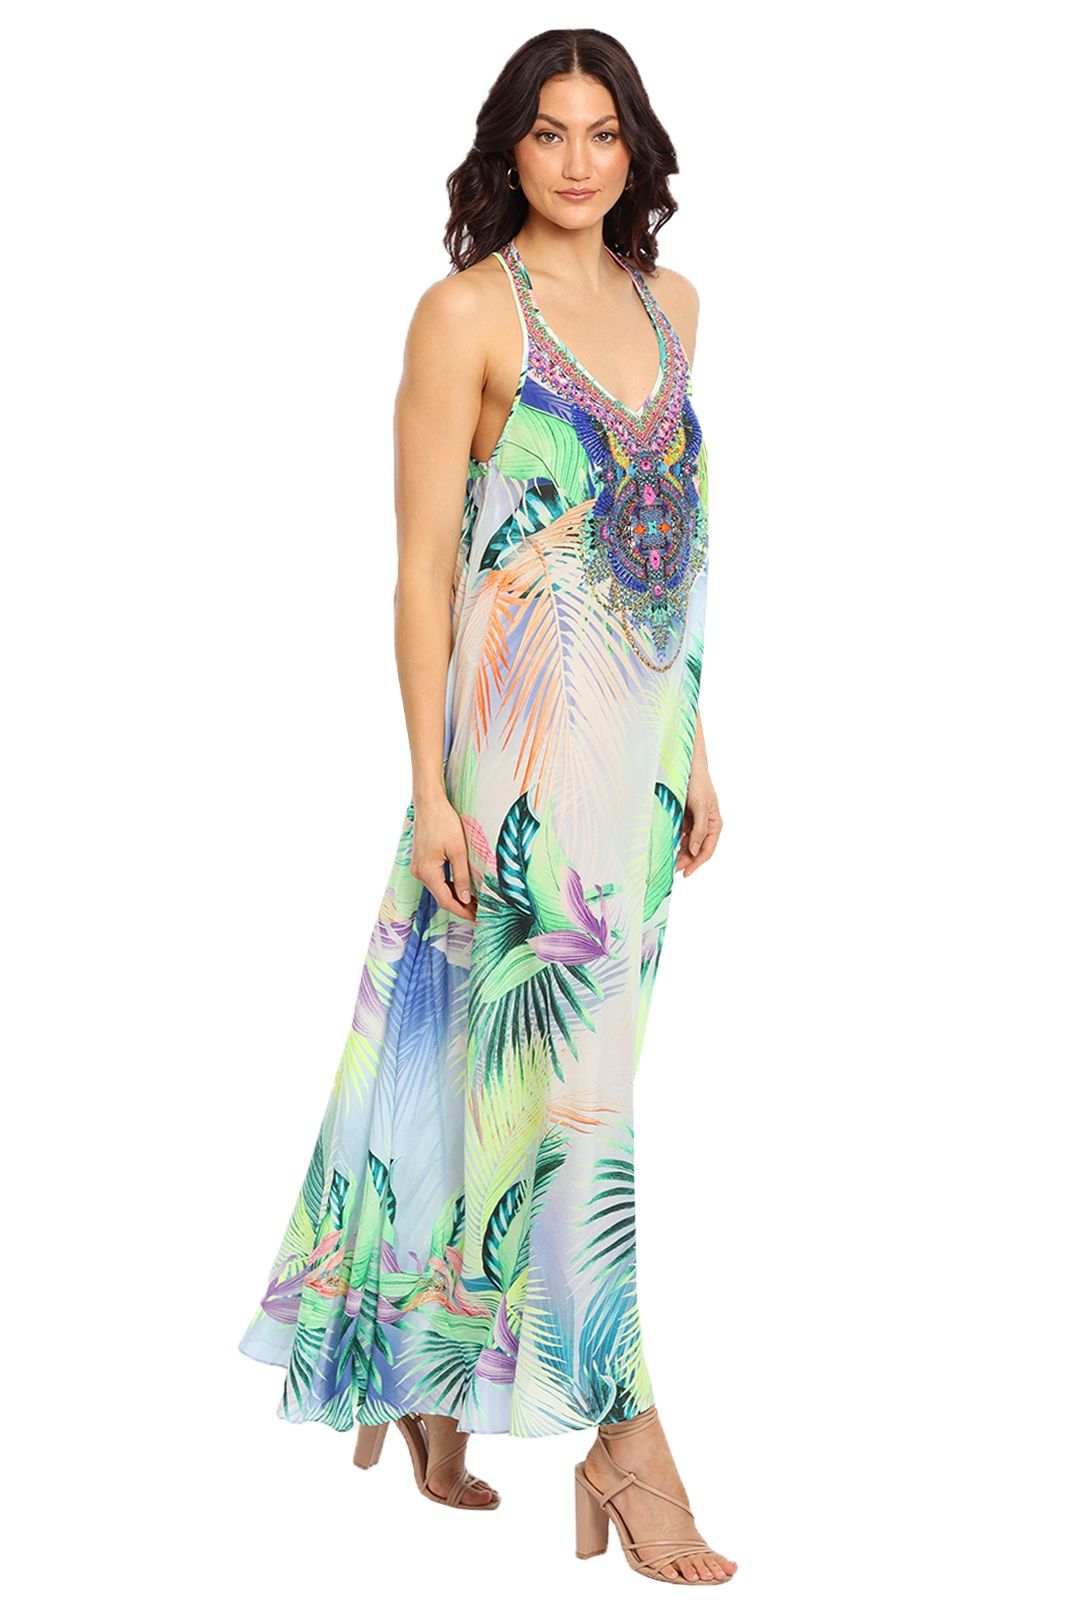 Camilla Blue Racerback Dress Whats Your Vice Tropical Print